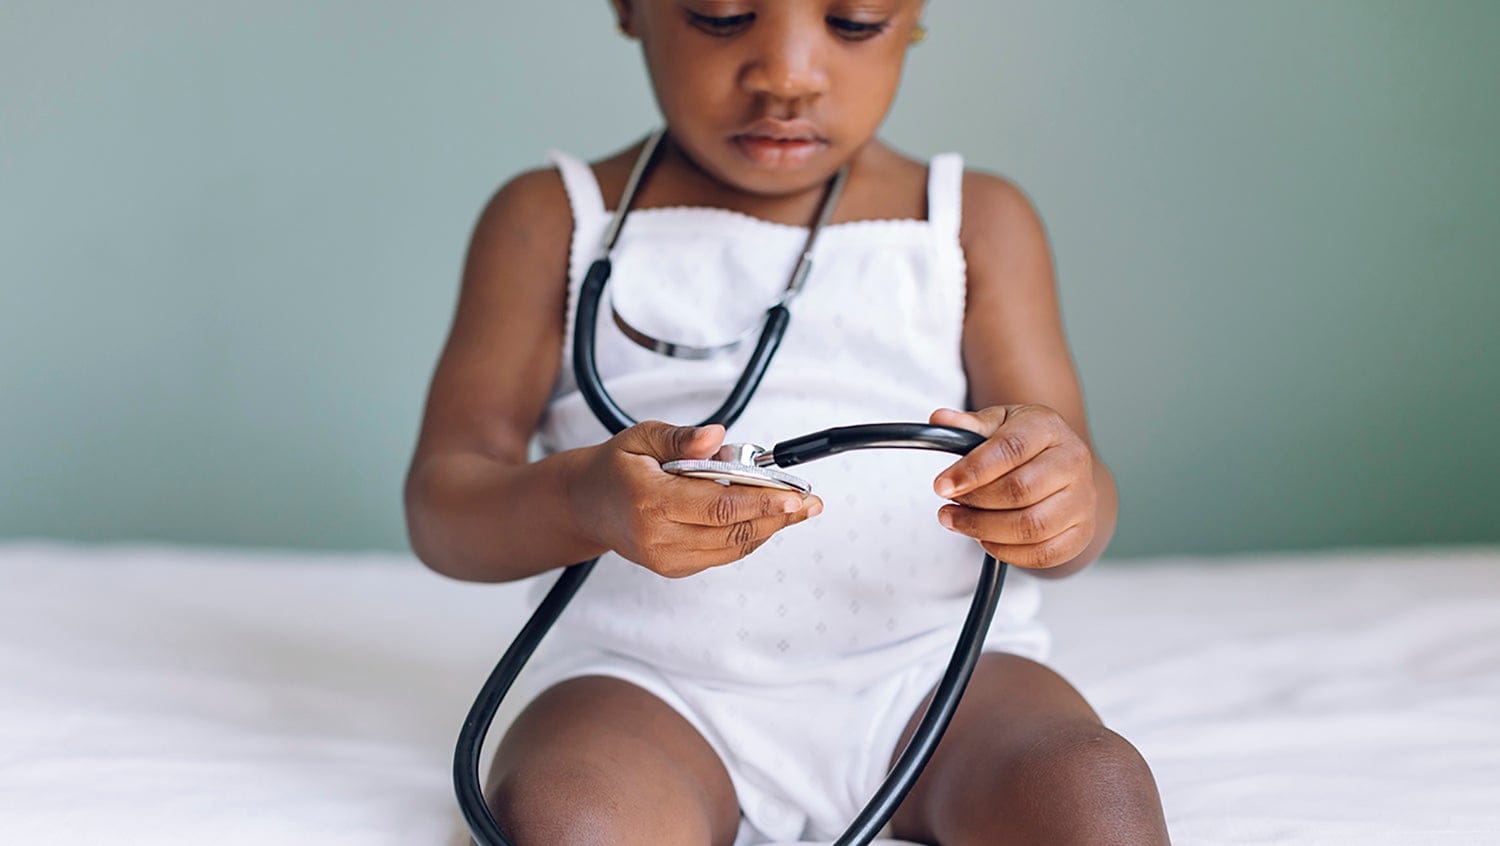 Young child sits on exam table looking at stethoscope in her hands